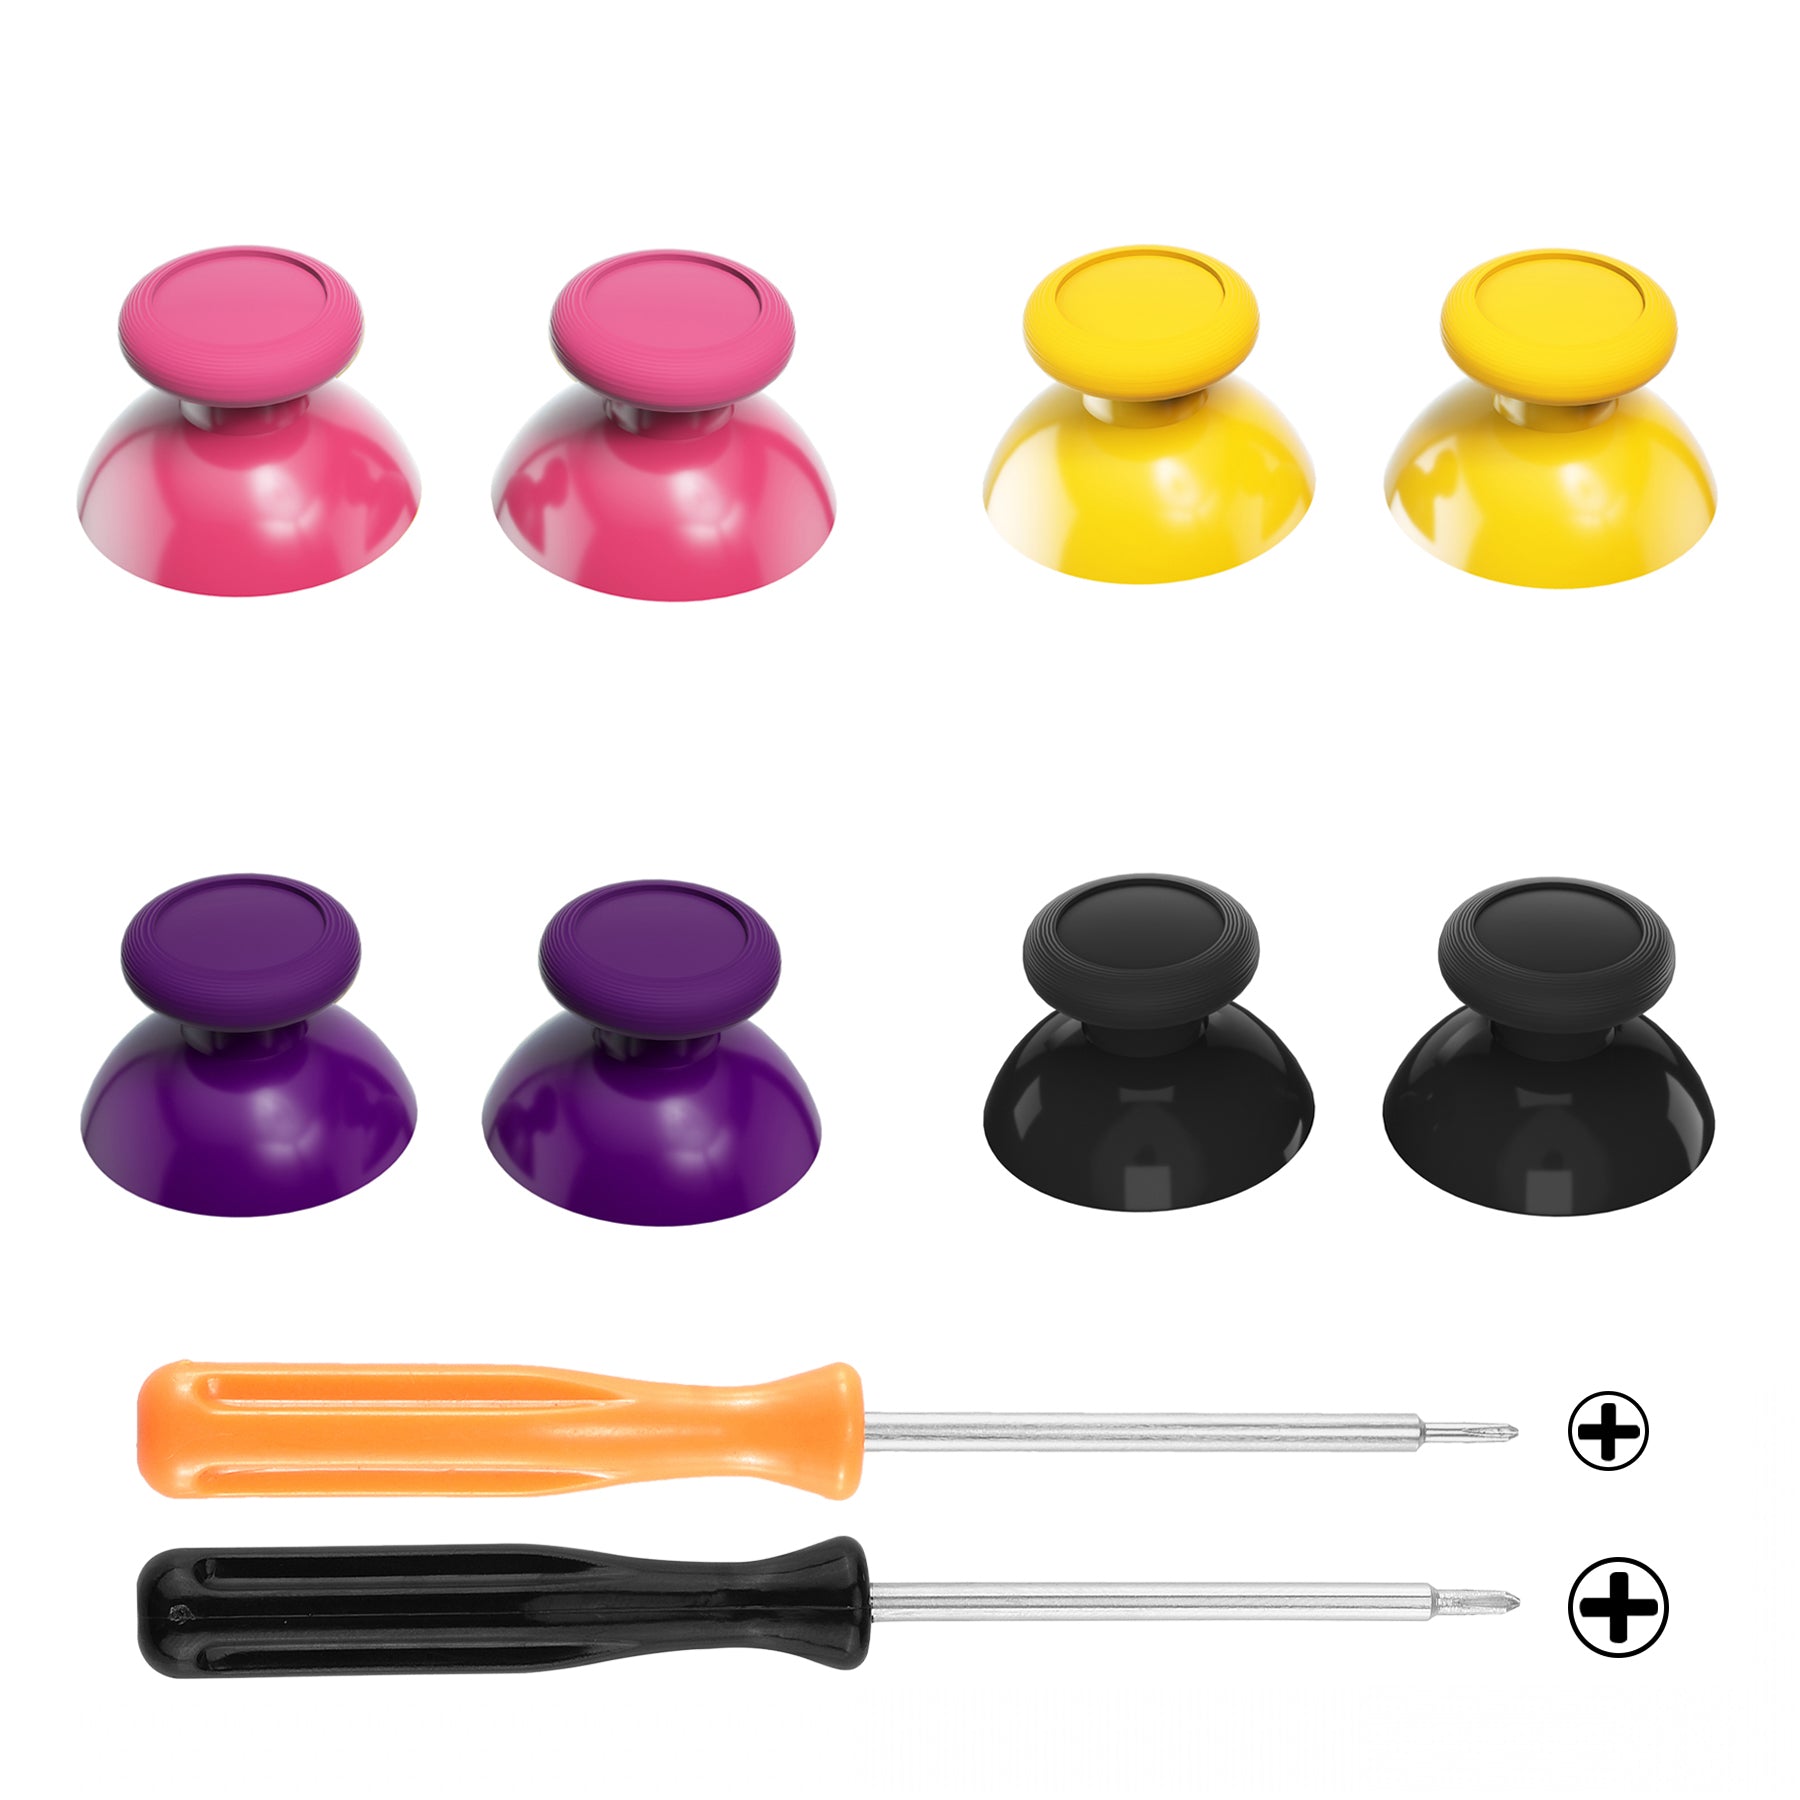 eXtremeRate Retail Replacement 3D Joystick Thumbsticks, Analog Thumb Sticks with Cross Screwdriver for Nintendo Switch Pro Controller - Yellow & Purple & Pink & Black - ZKRM504